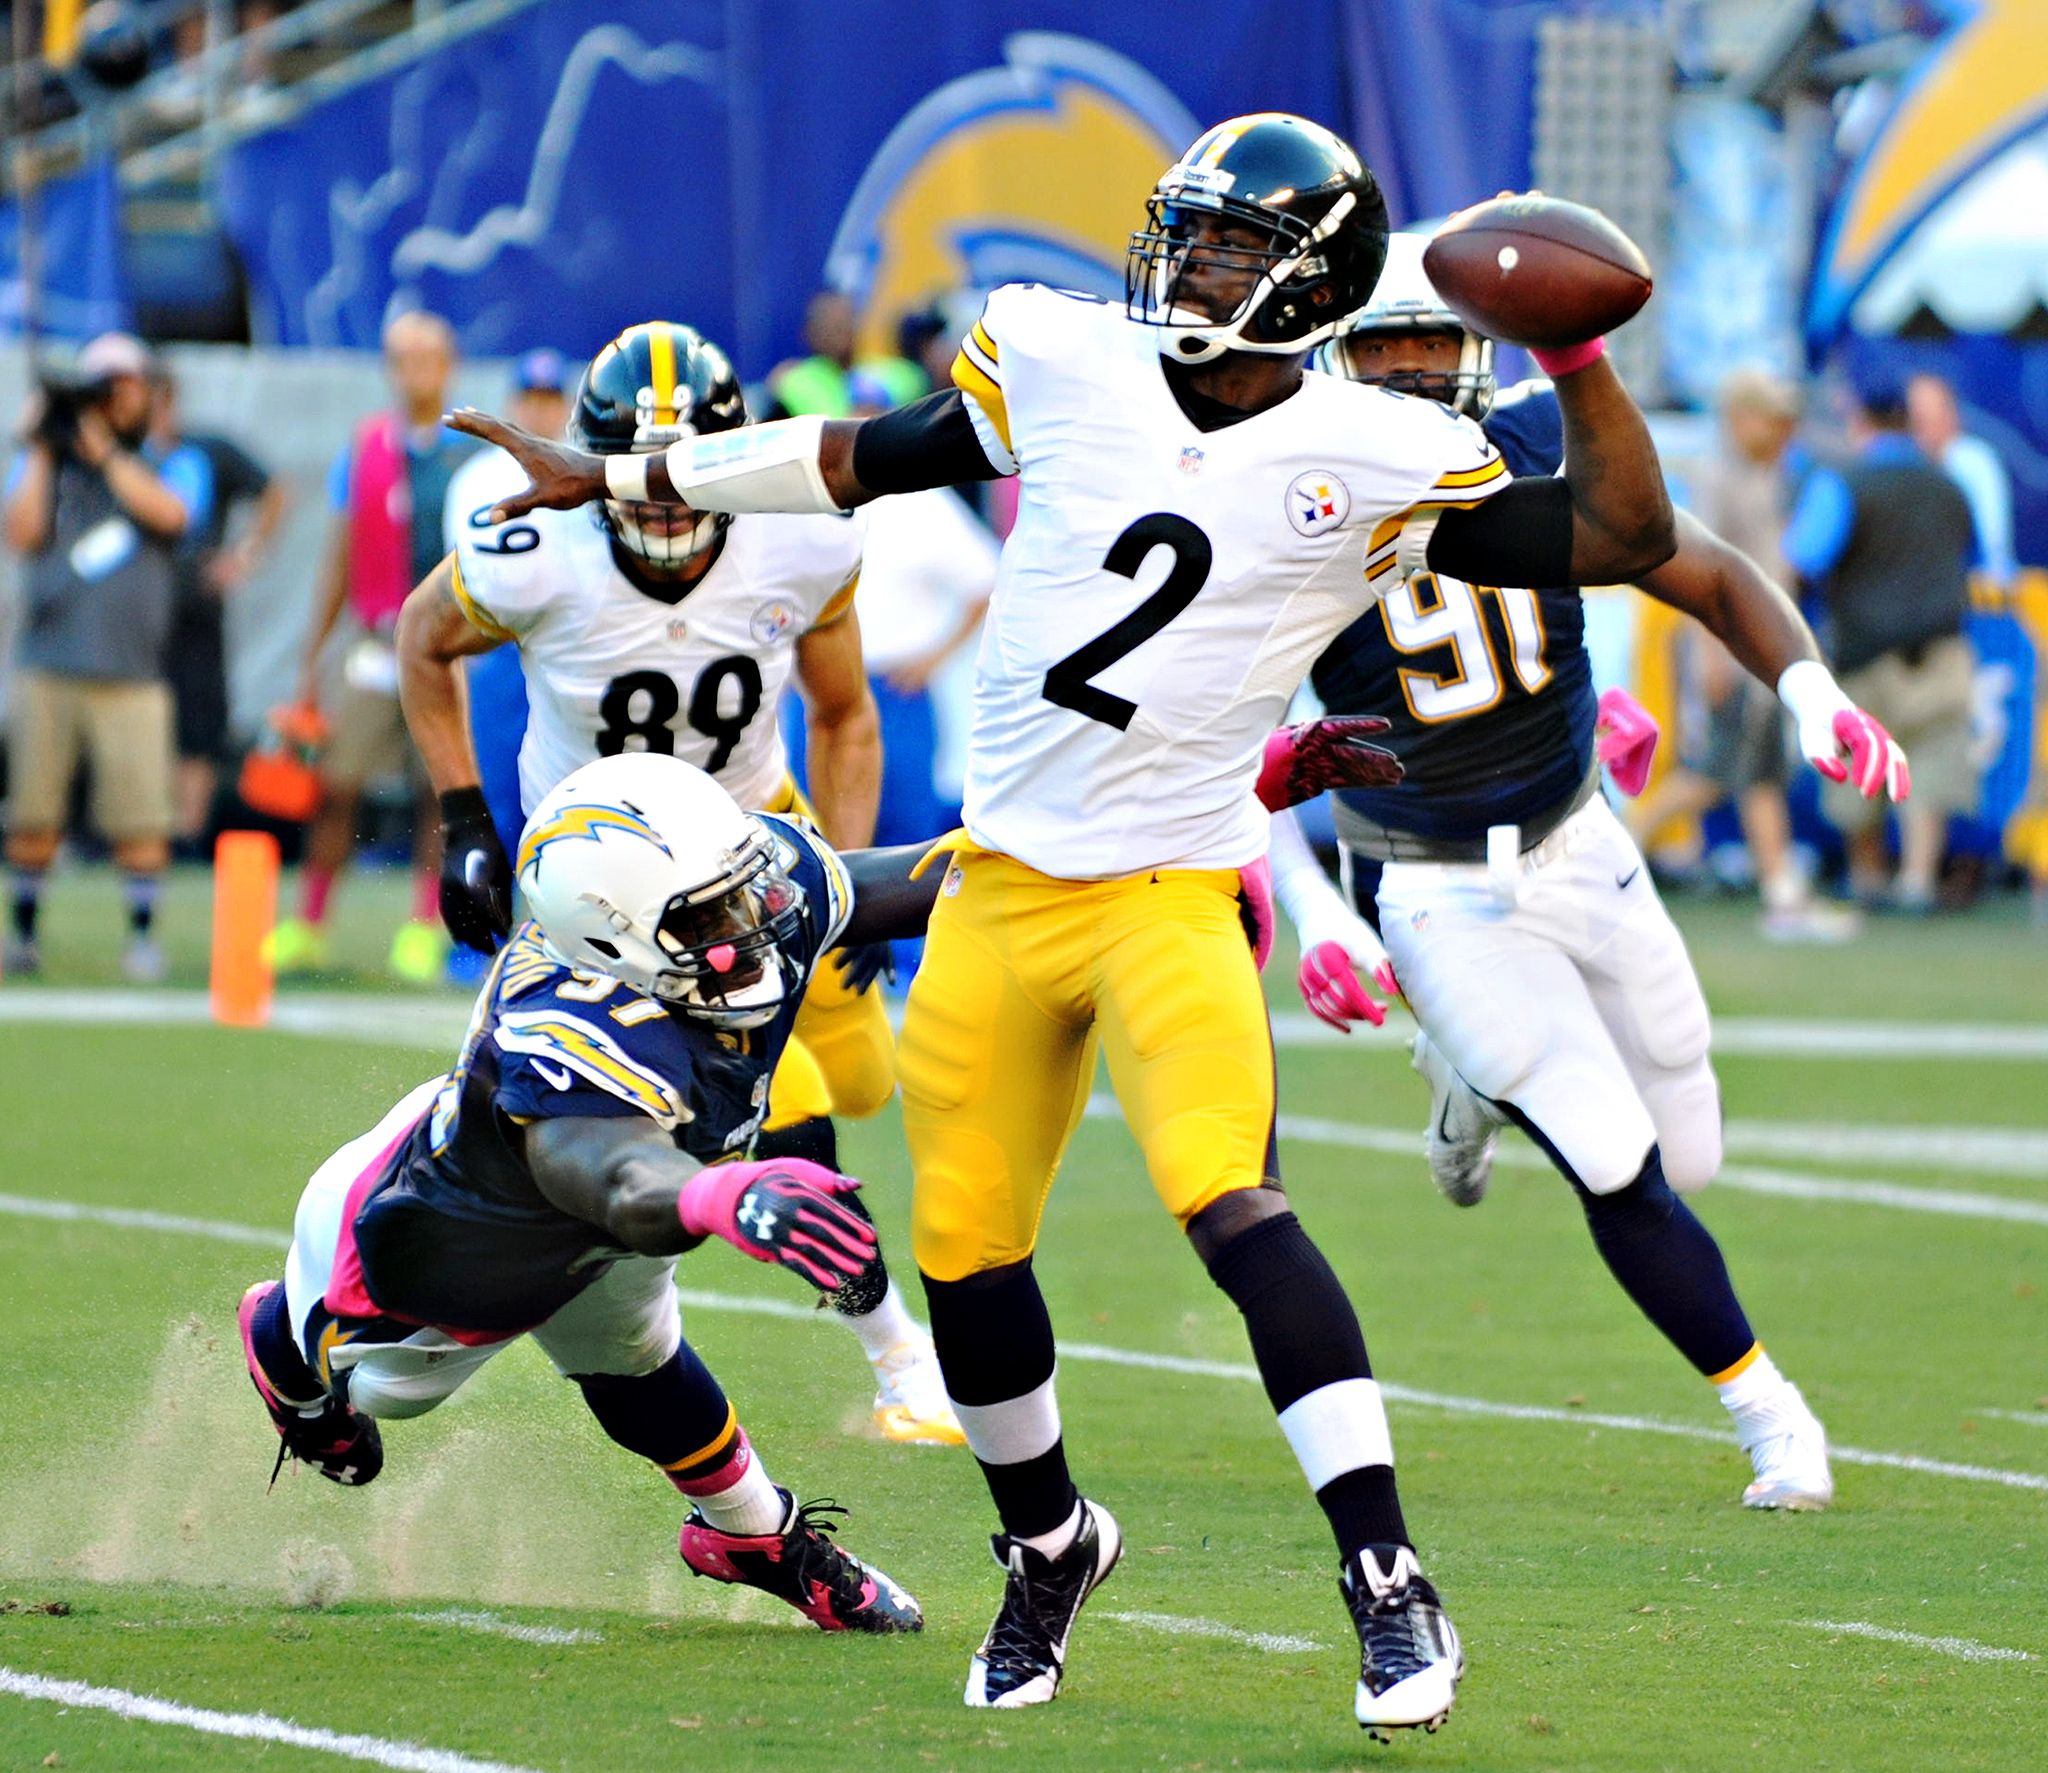 Michael Vick Photos Steelers vs. Chargers ESPN